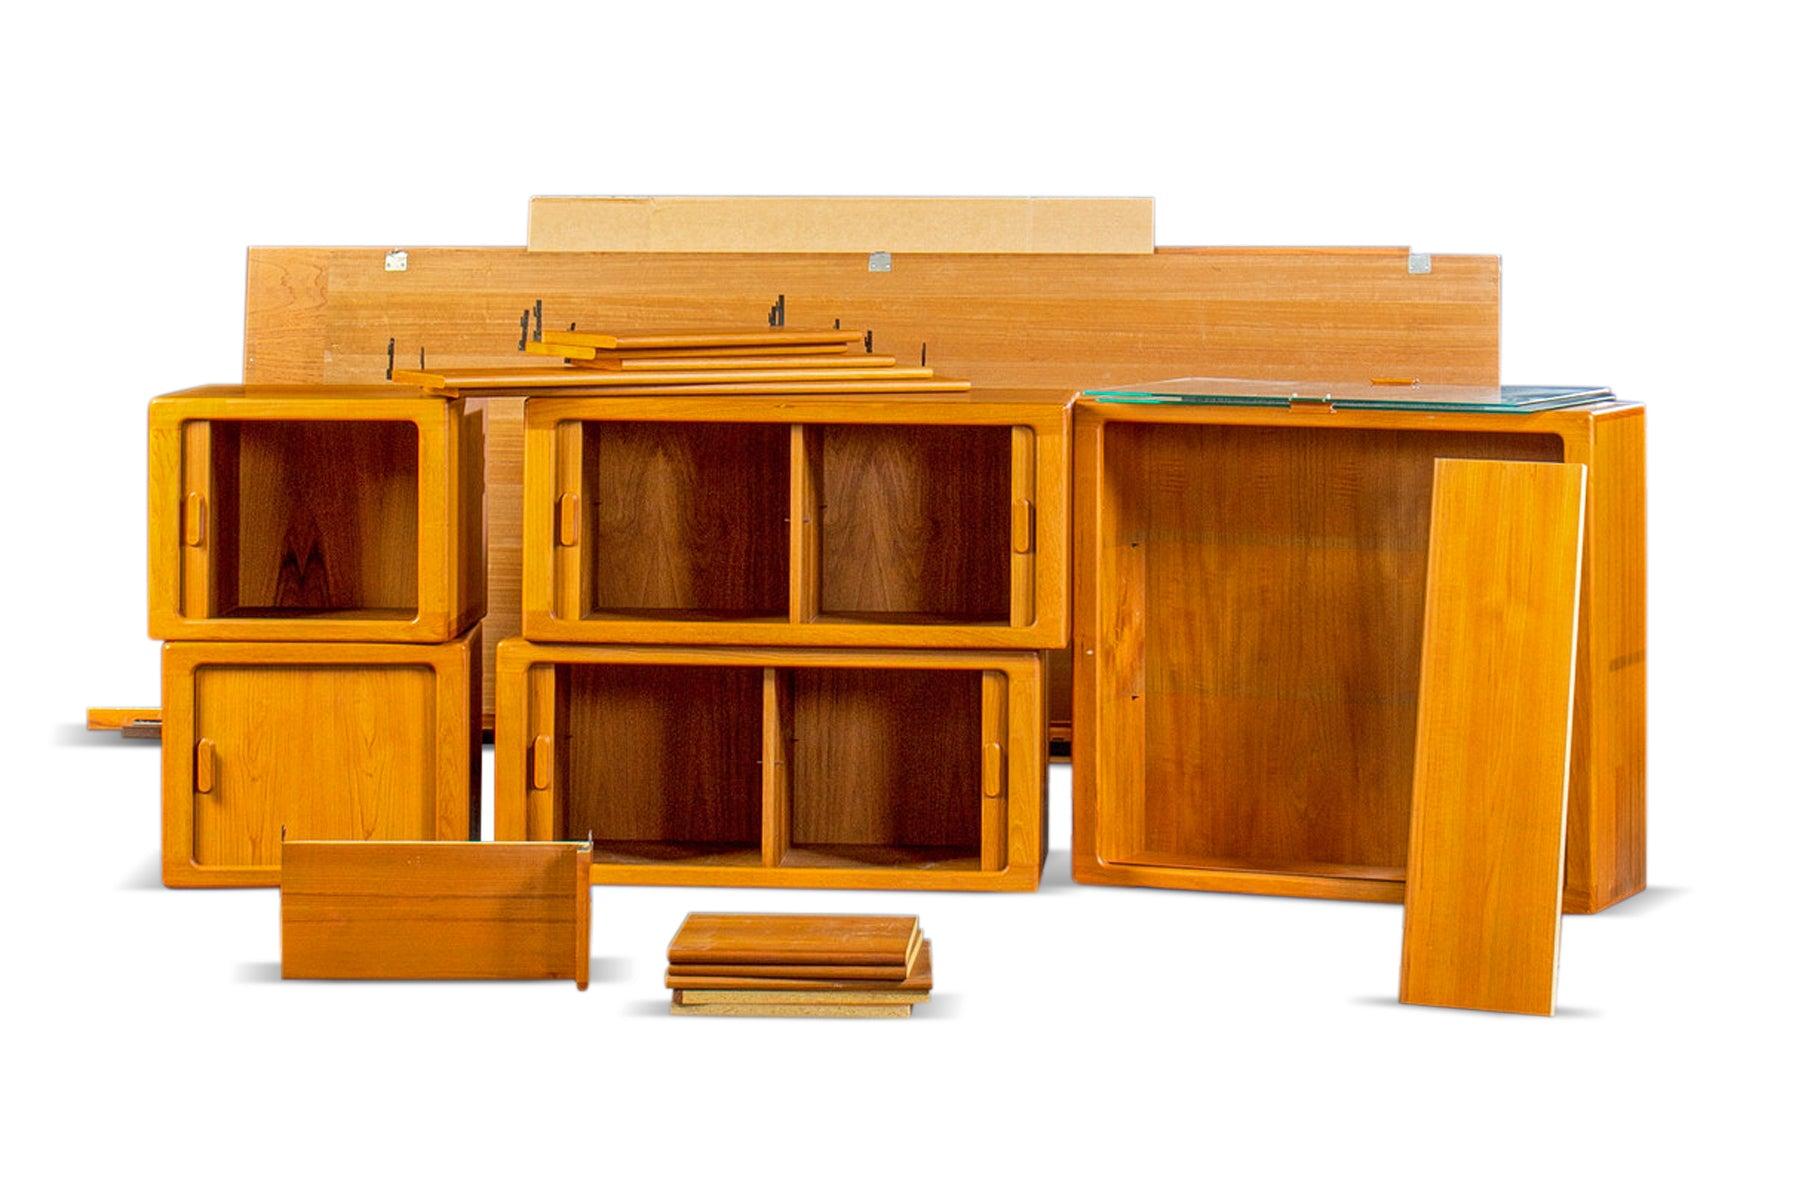 Danish Modern Teak Mid Century Wall Unit / System By CFC Silkeborg In Excellent Condition For Sale In Berkeley, CA